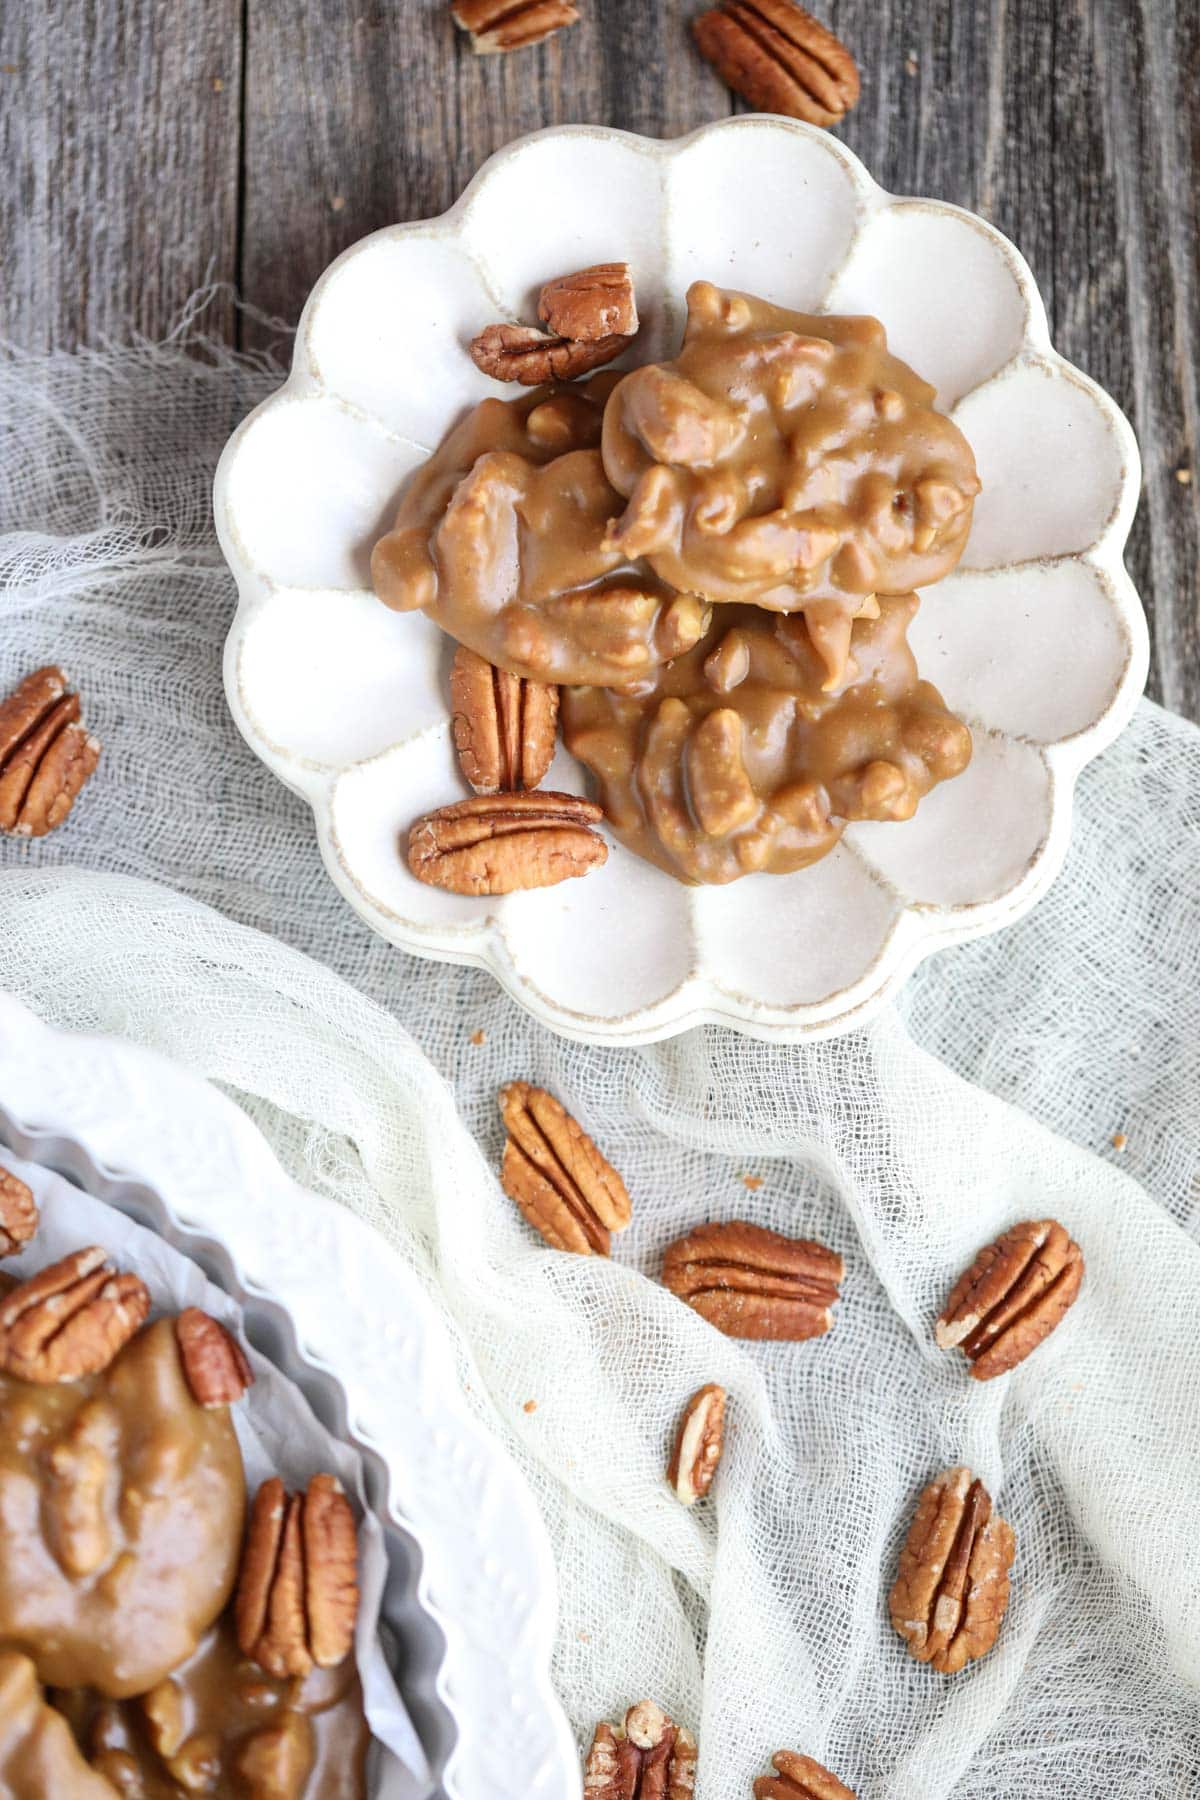 southern pecan pralines arranged on a small white plate.